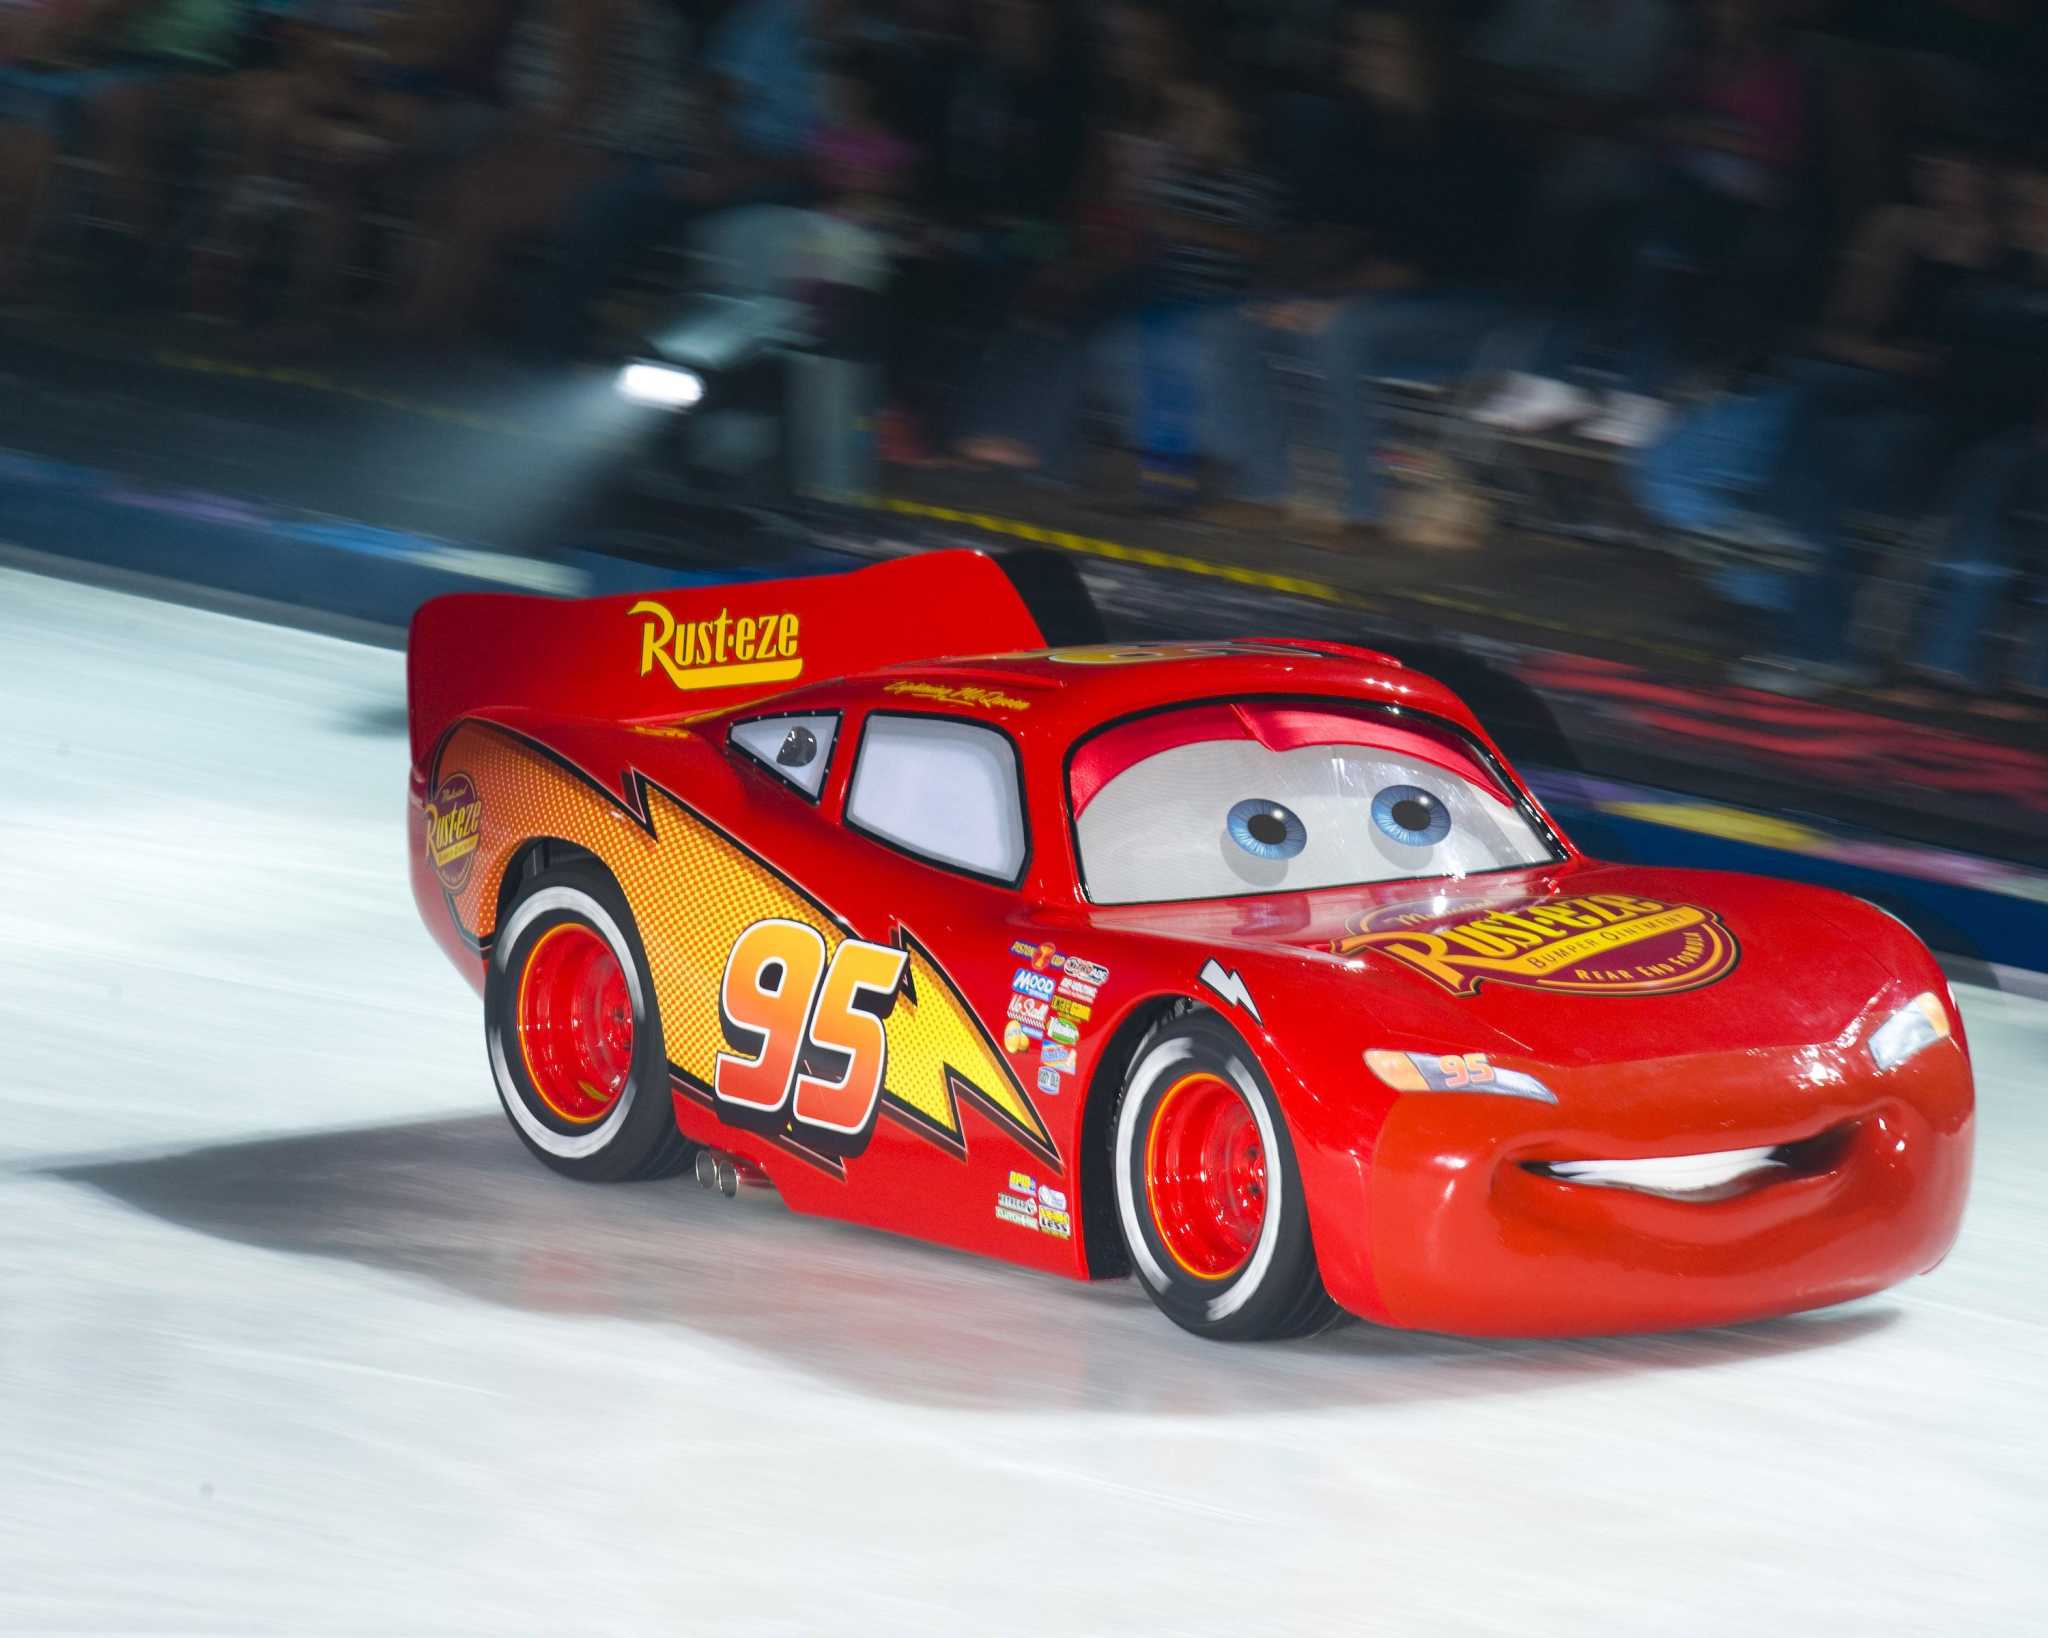 Disney on Ice's 'Worlds of Enchantment' will rev up 'Cars' fans